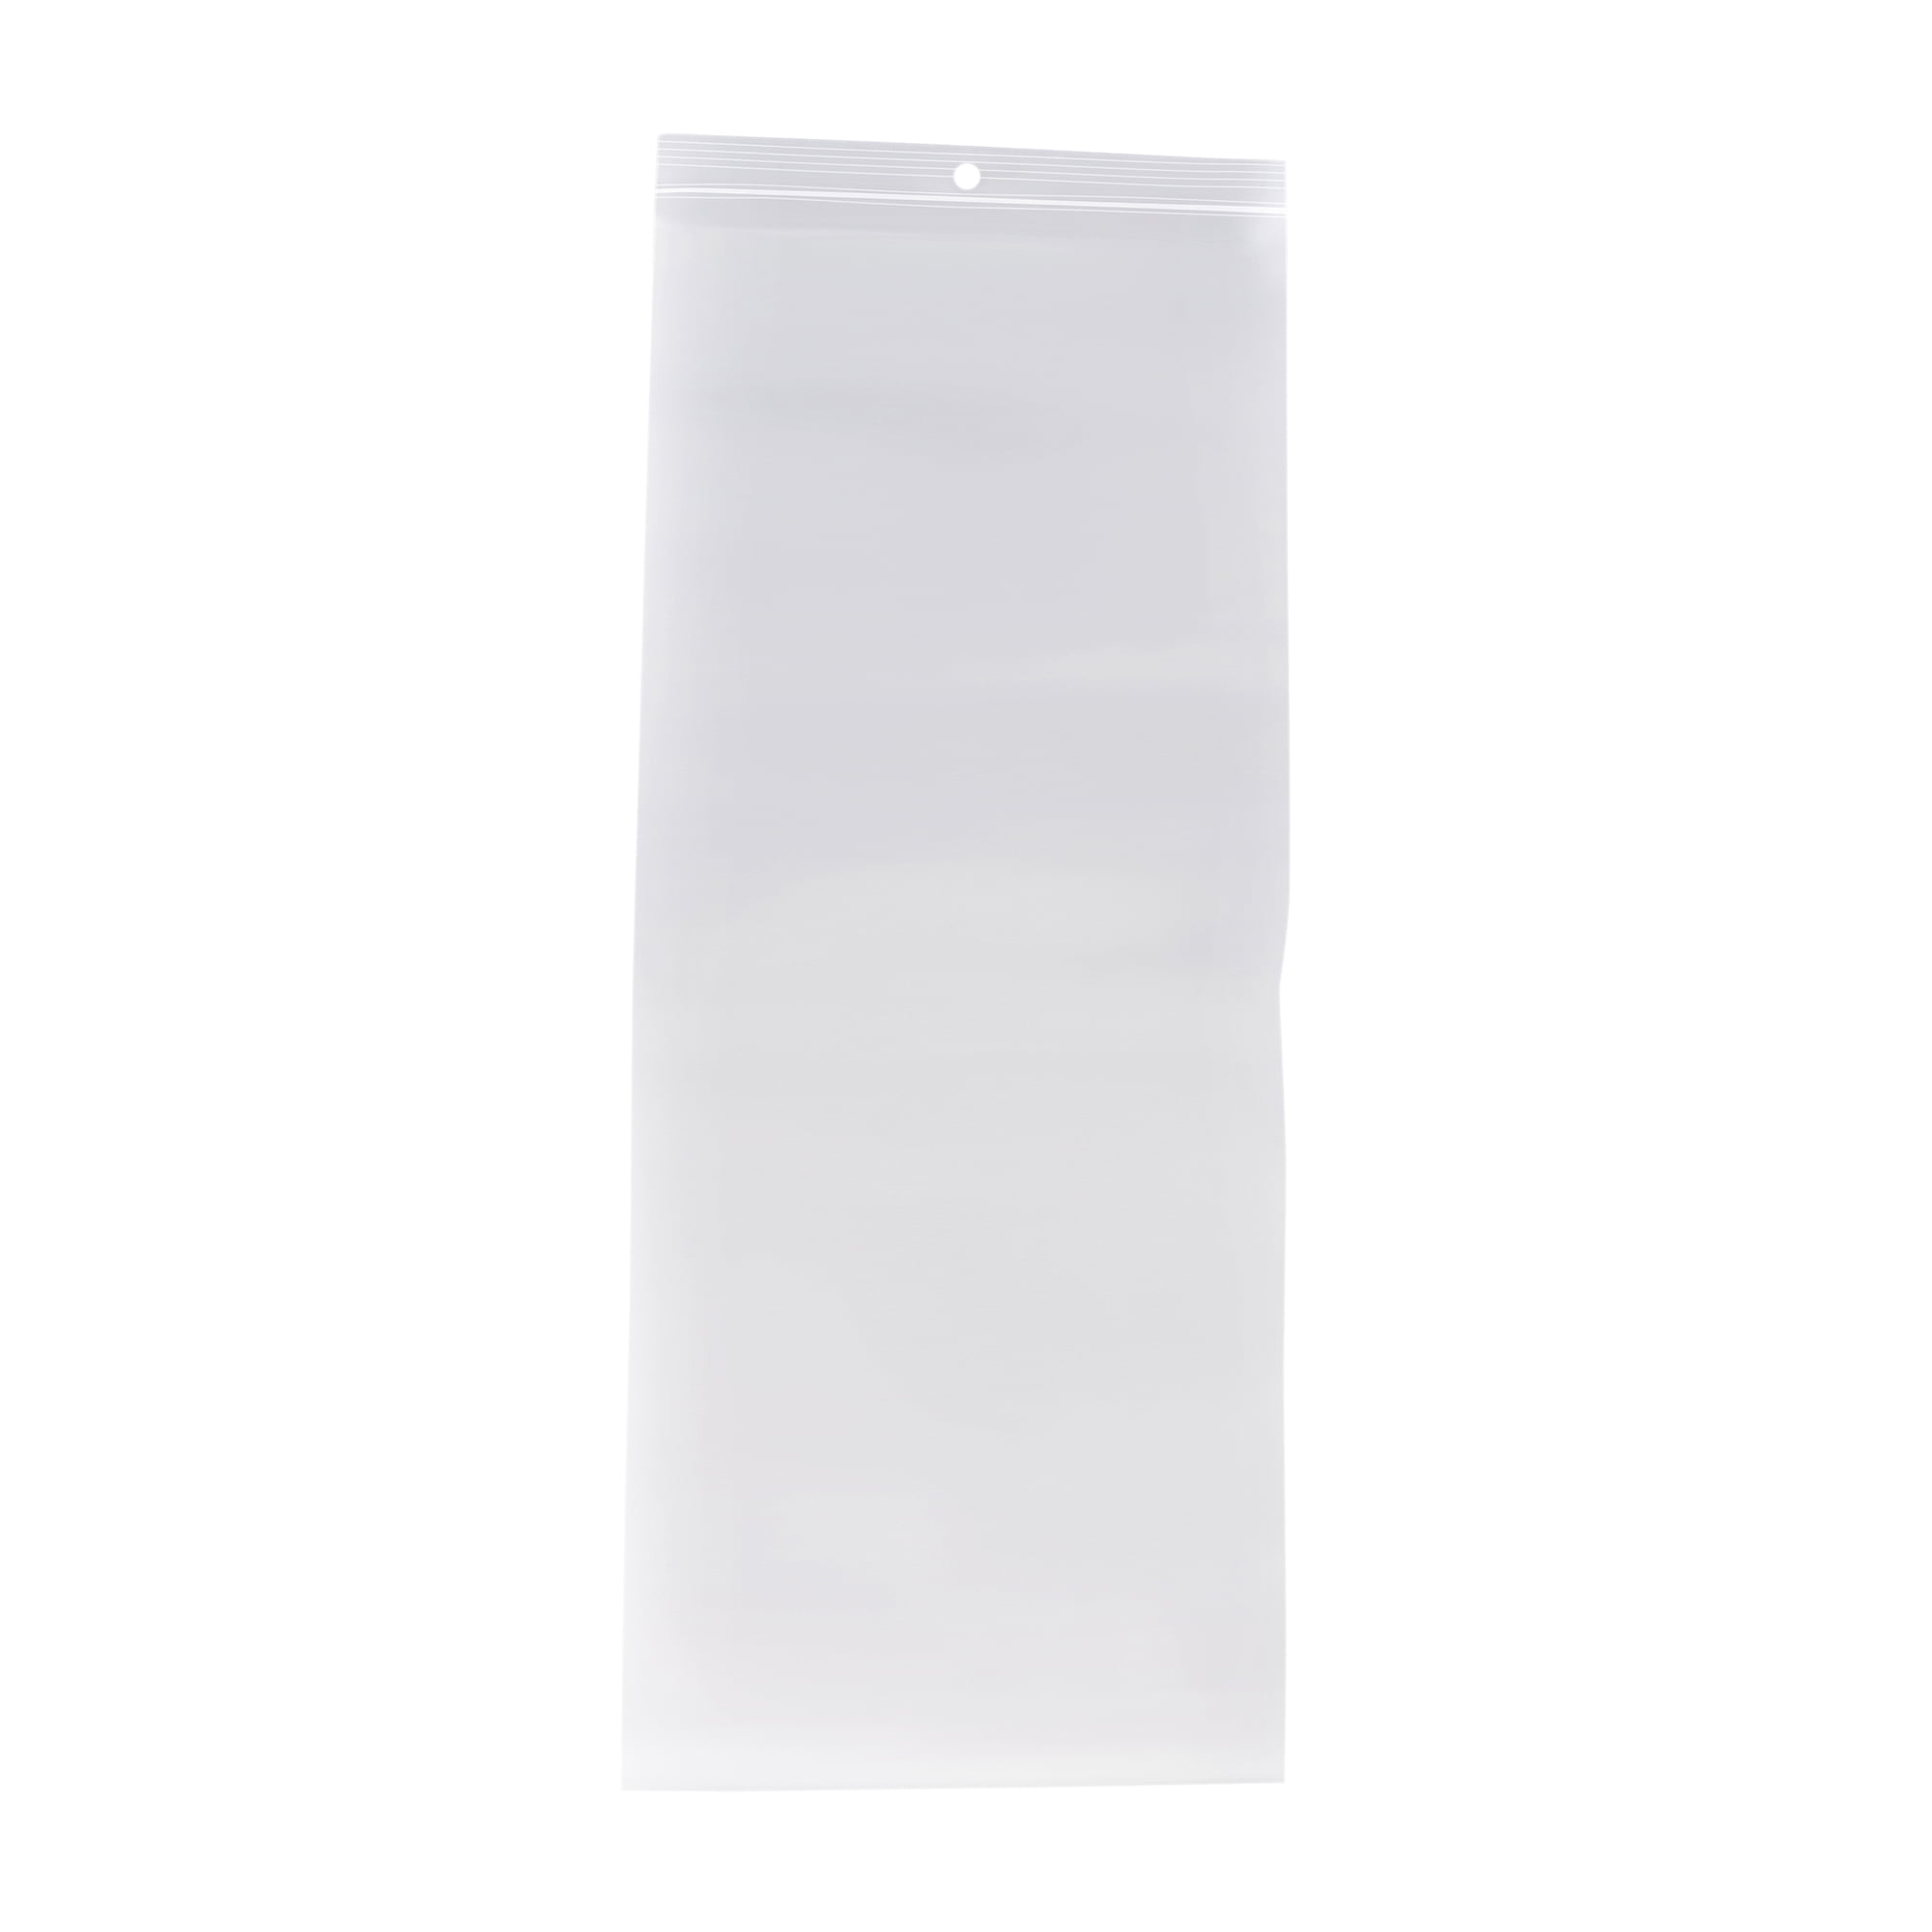 SZDP RNKLIGVIH ZB22 Small Reclosable Seal Plastic Bags, Clear - 1000 pack